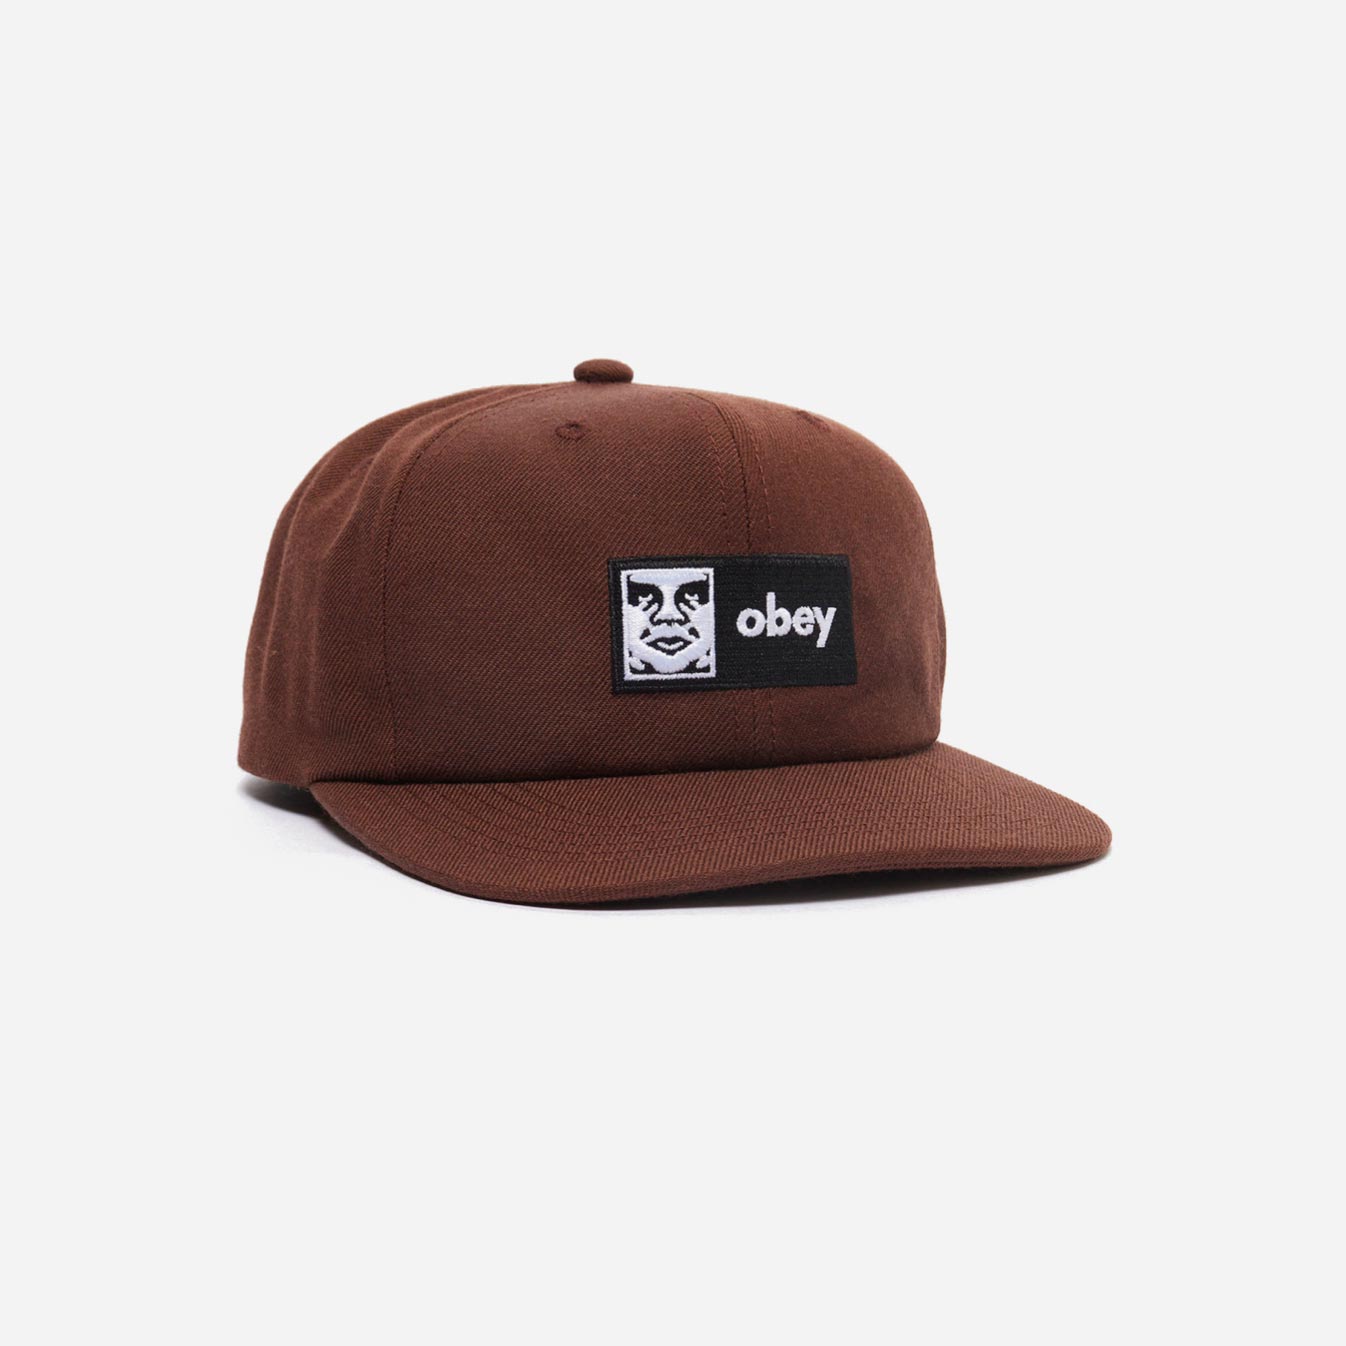 Obey Case 6 Panel Cap - Brown